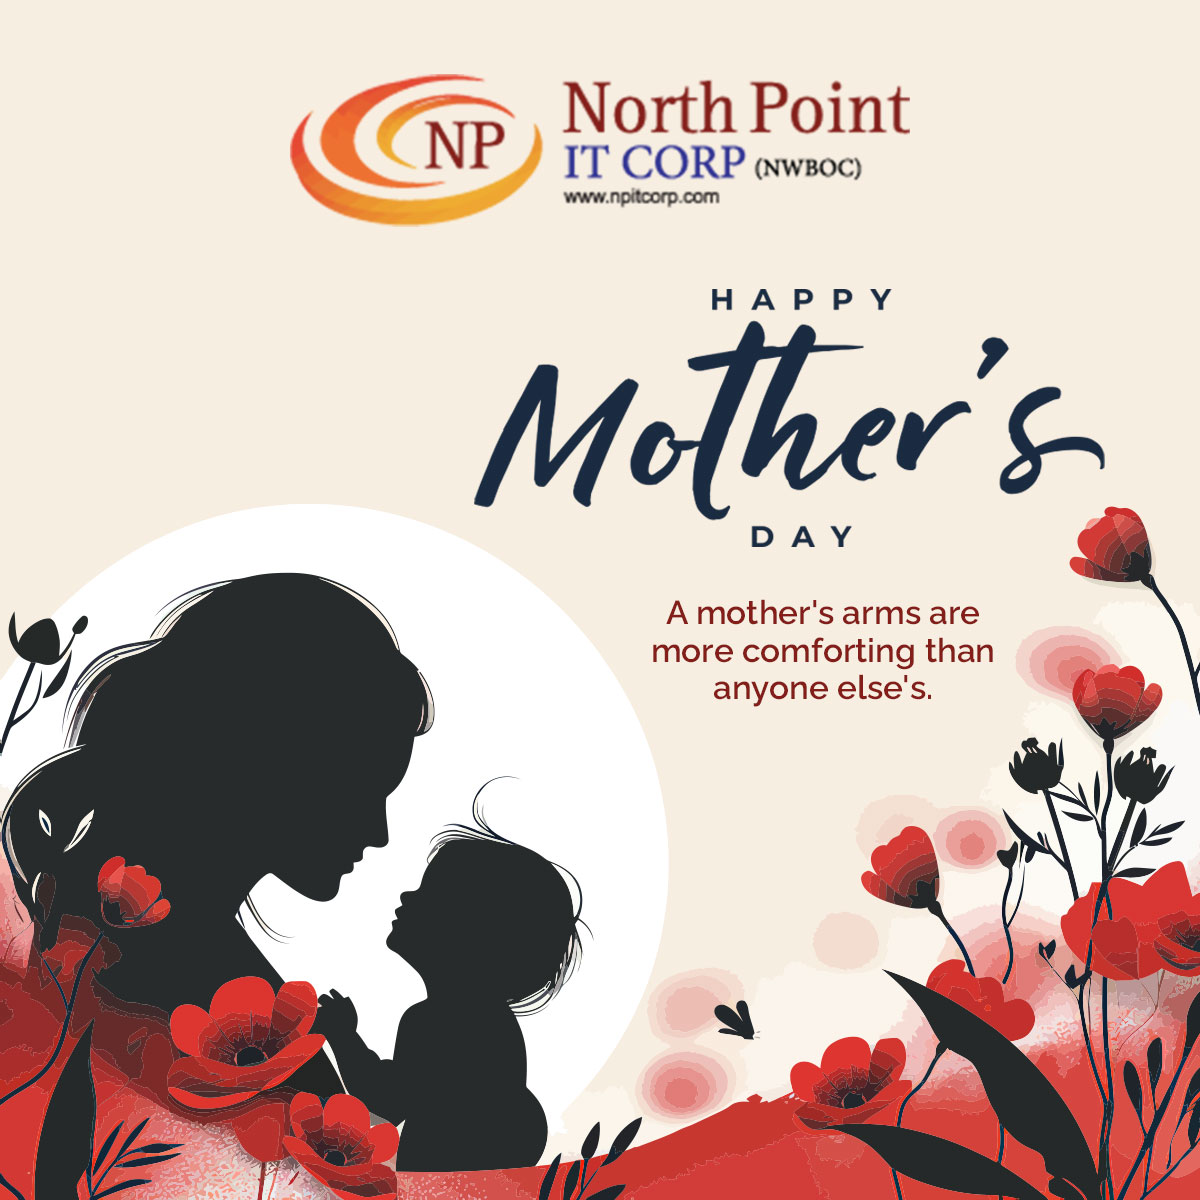 Happy Mother's Day..!
A mother's arms are more comforting than anyone else's.

#NorthPoint #hrconsultant #newjobs #creativity #federalgovernment #services #talented #operations #cleansing #operations #ability #may12 #mothersday2024 #mothersday #mother #love #motherlove #family